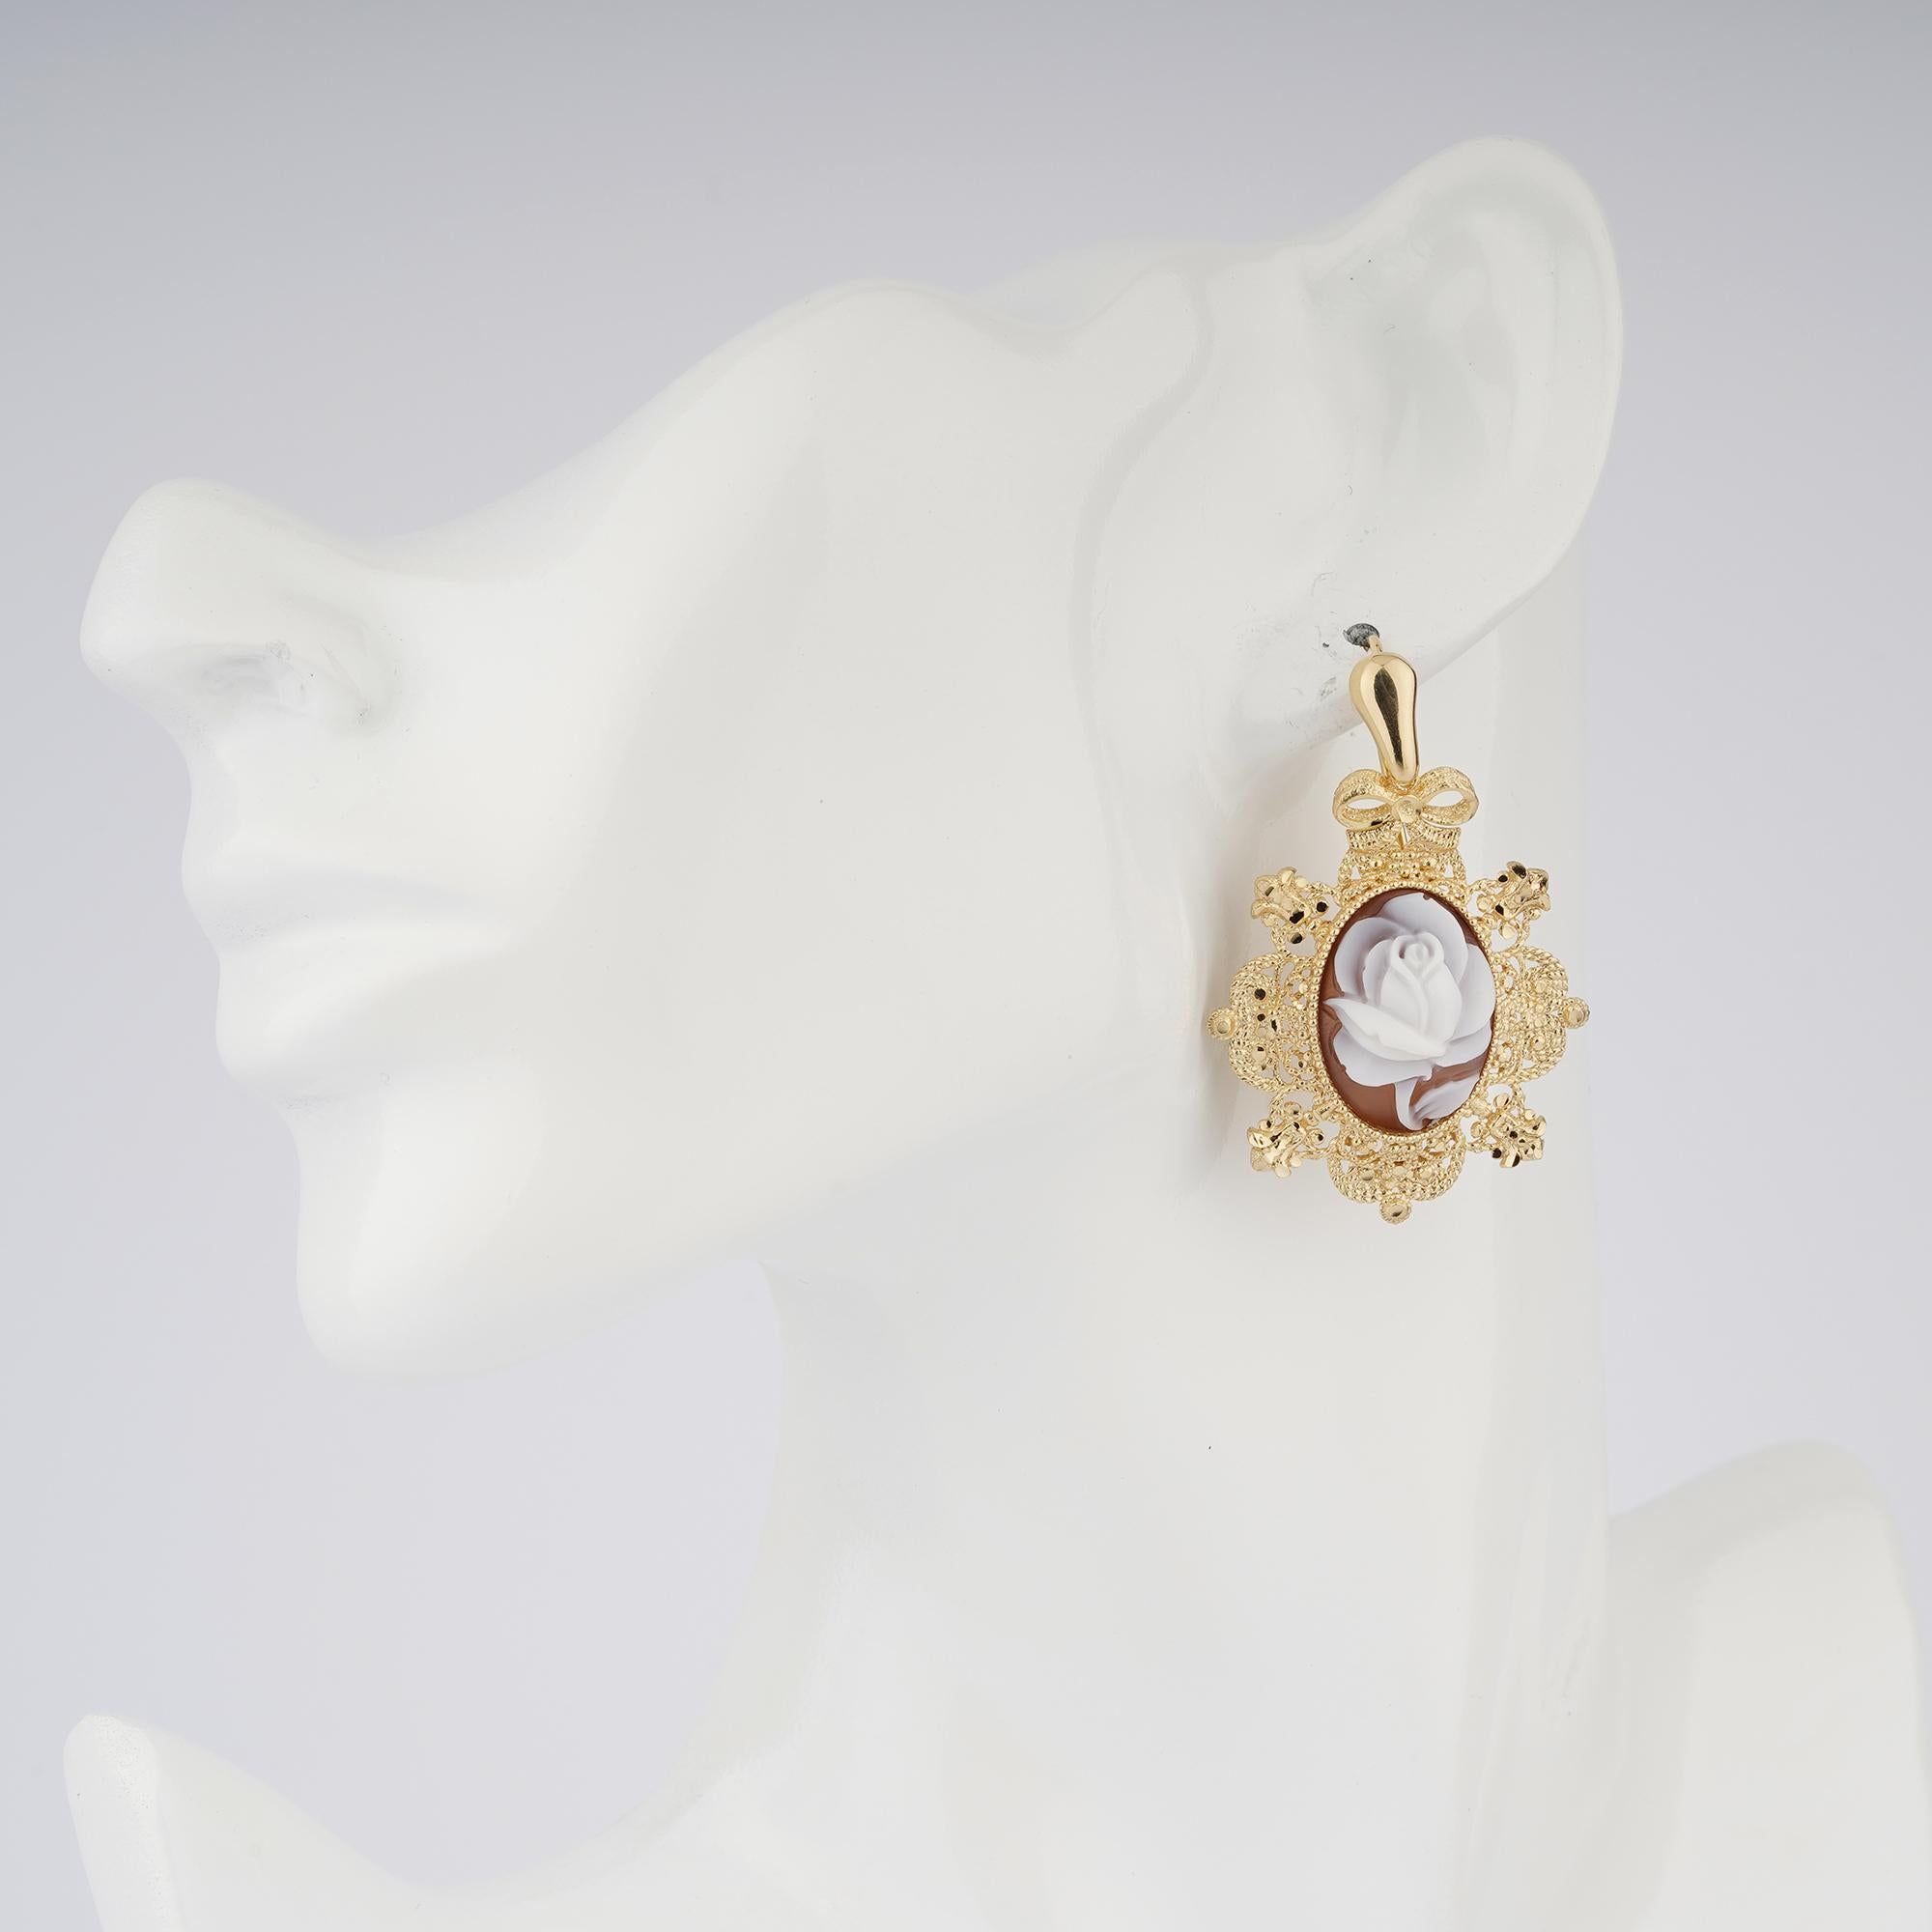 Fully hand-carved roses on a sea shell cameo set in a 18ct Gold plated silver earrings . 

Romantic and easy to wear earrings.

Carvings are performed by our master artisans with generations of experience, all coming from Torre del Greco, Italy -